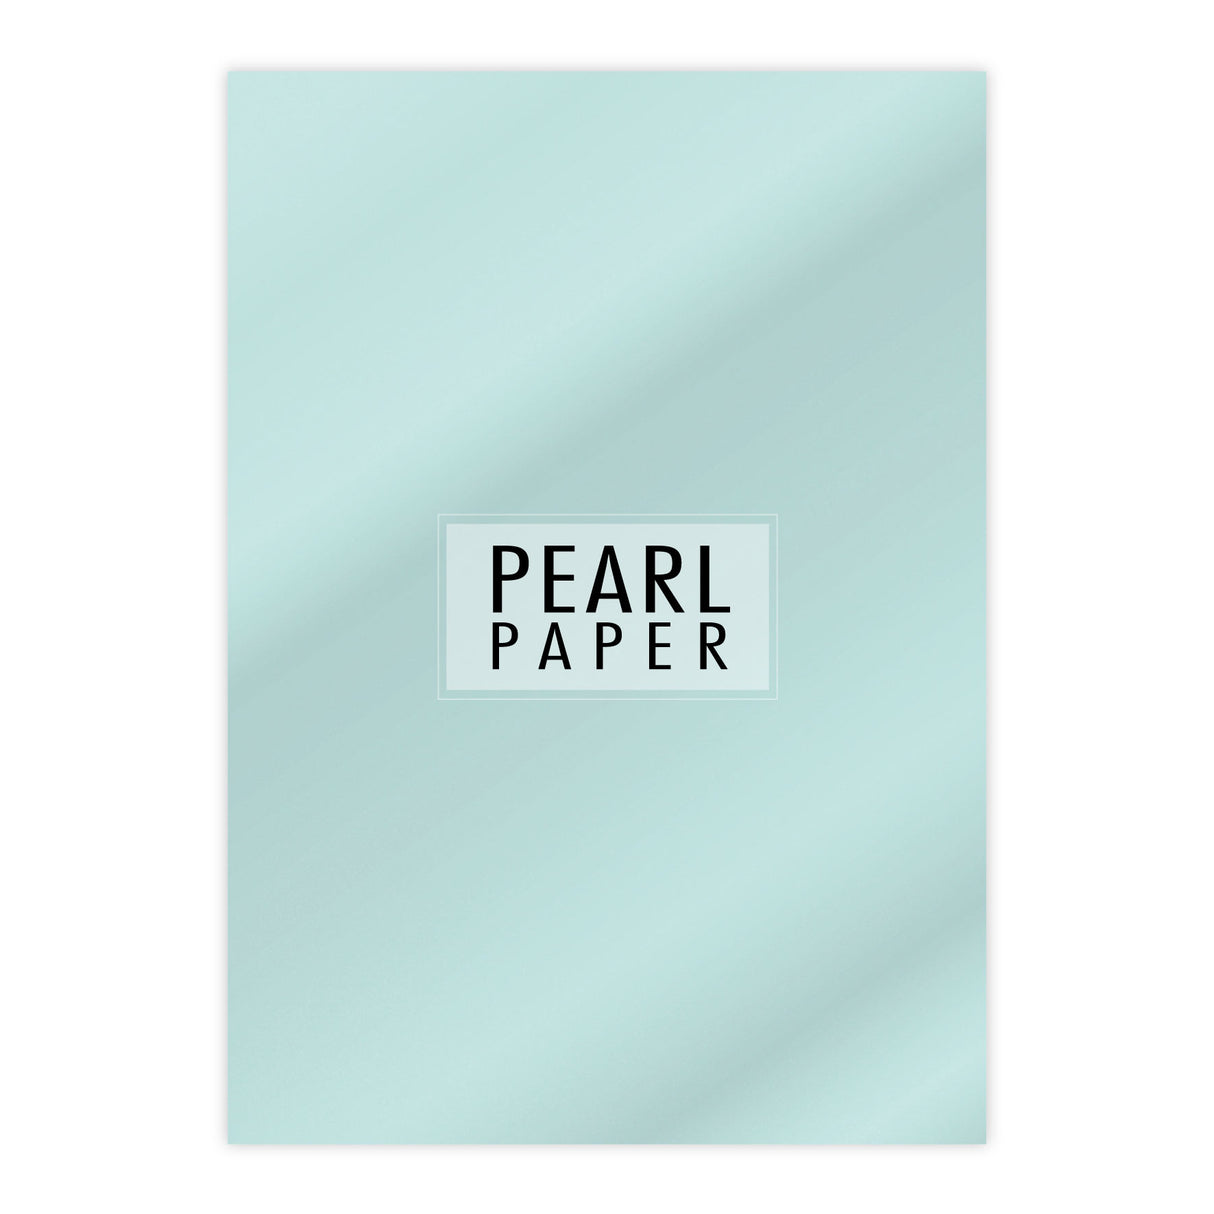 Chloes A4 Luxury Pearl Paper 10 Sheets Aquamarine